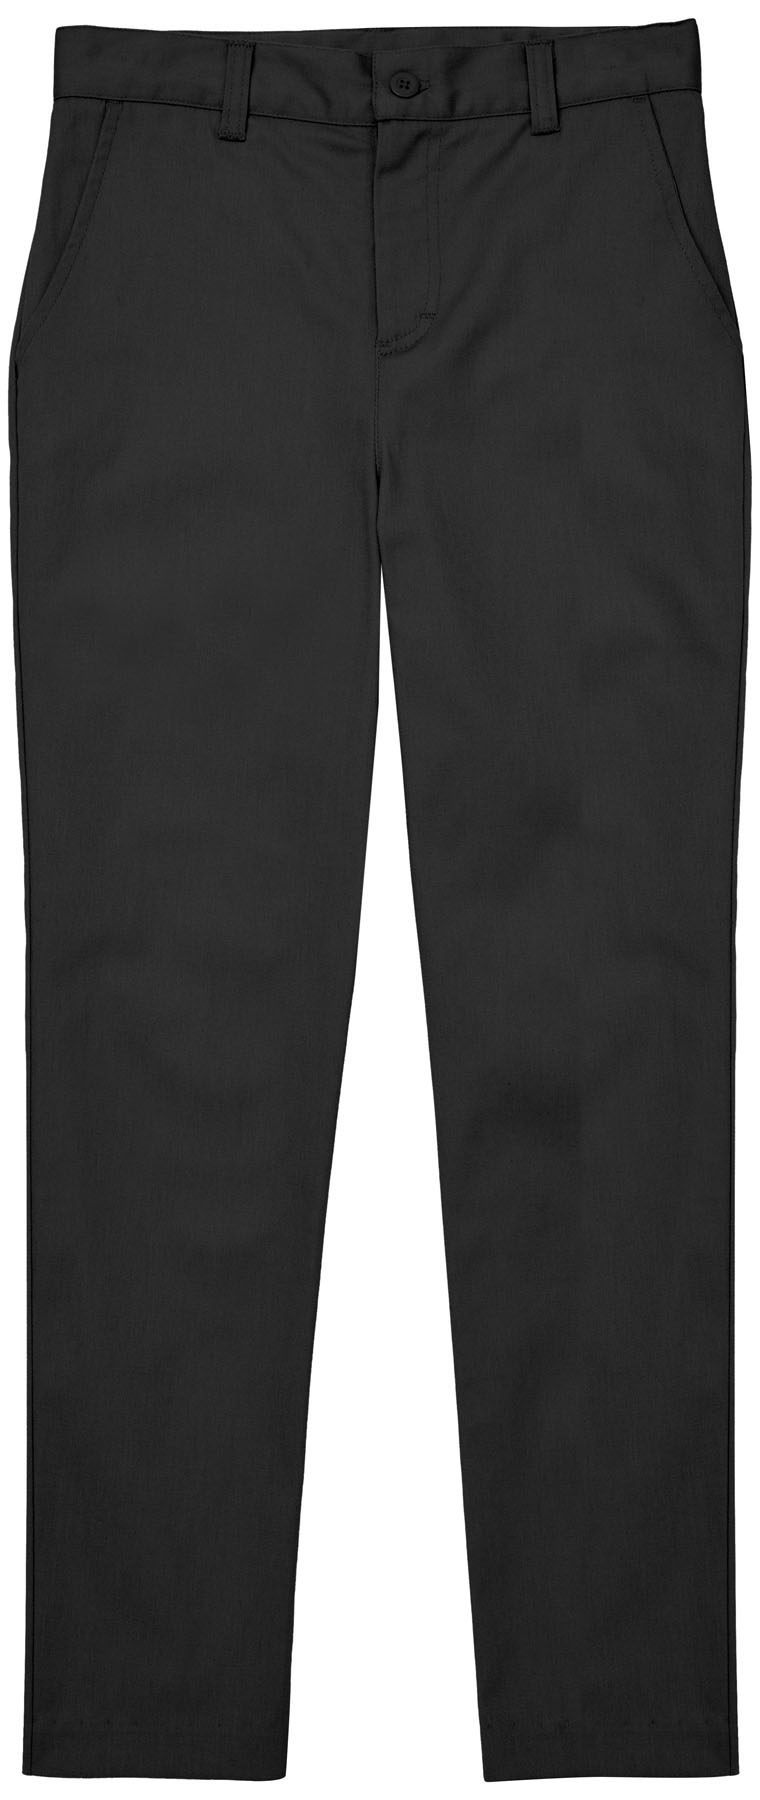 None CR101K Girls Flat Front Pant